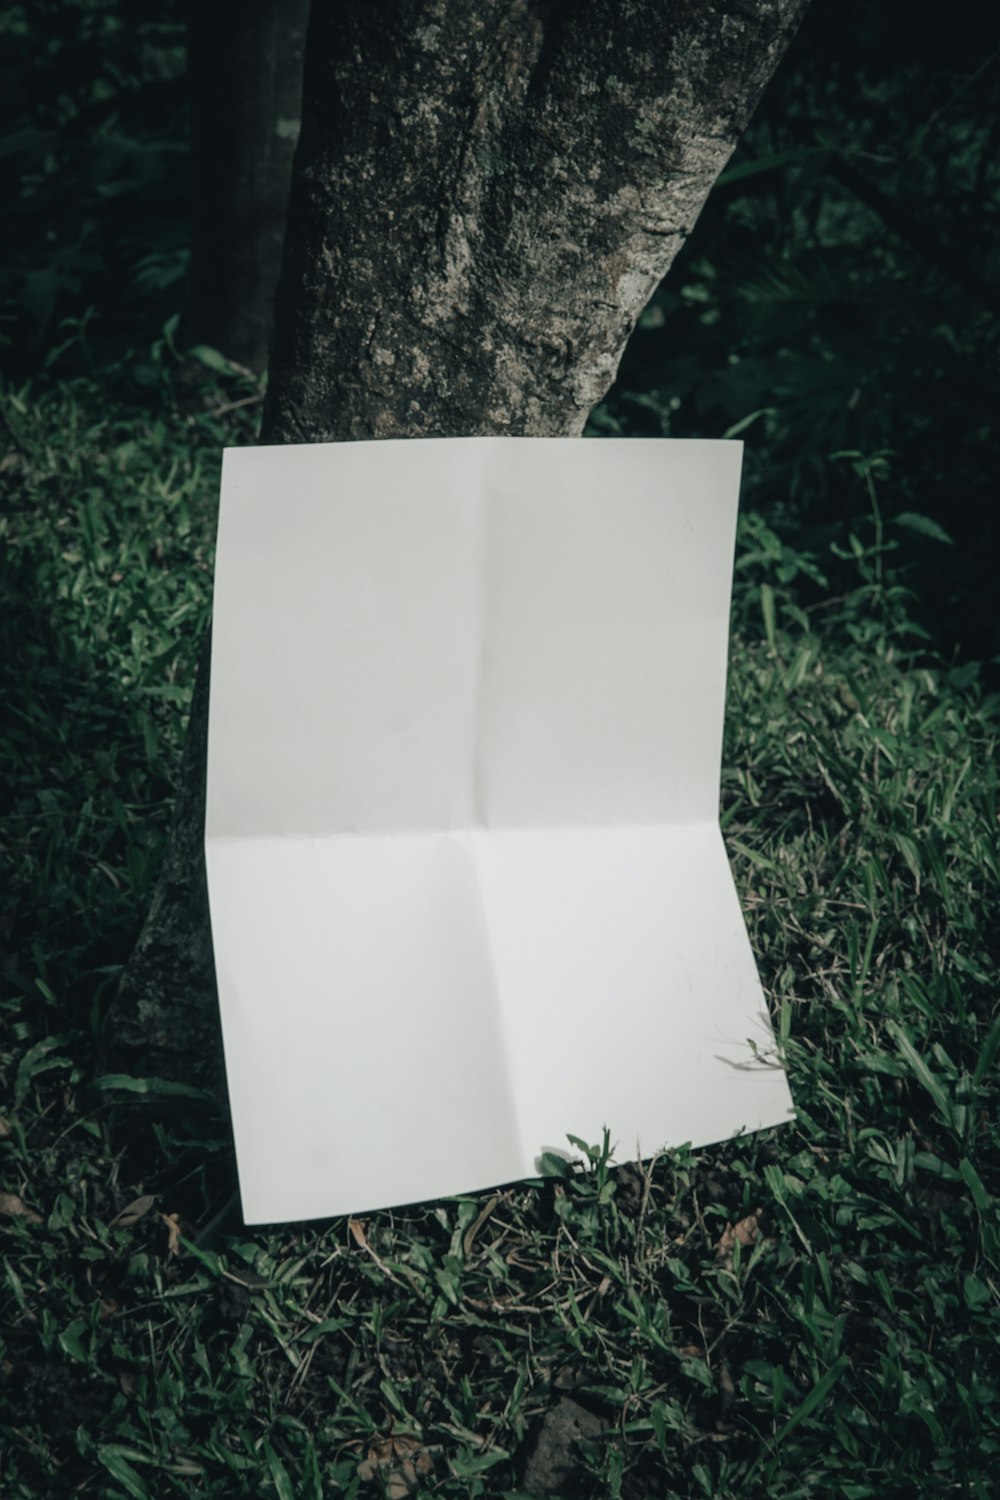 a piece of paper sitting on the ground next to a tree